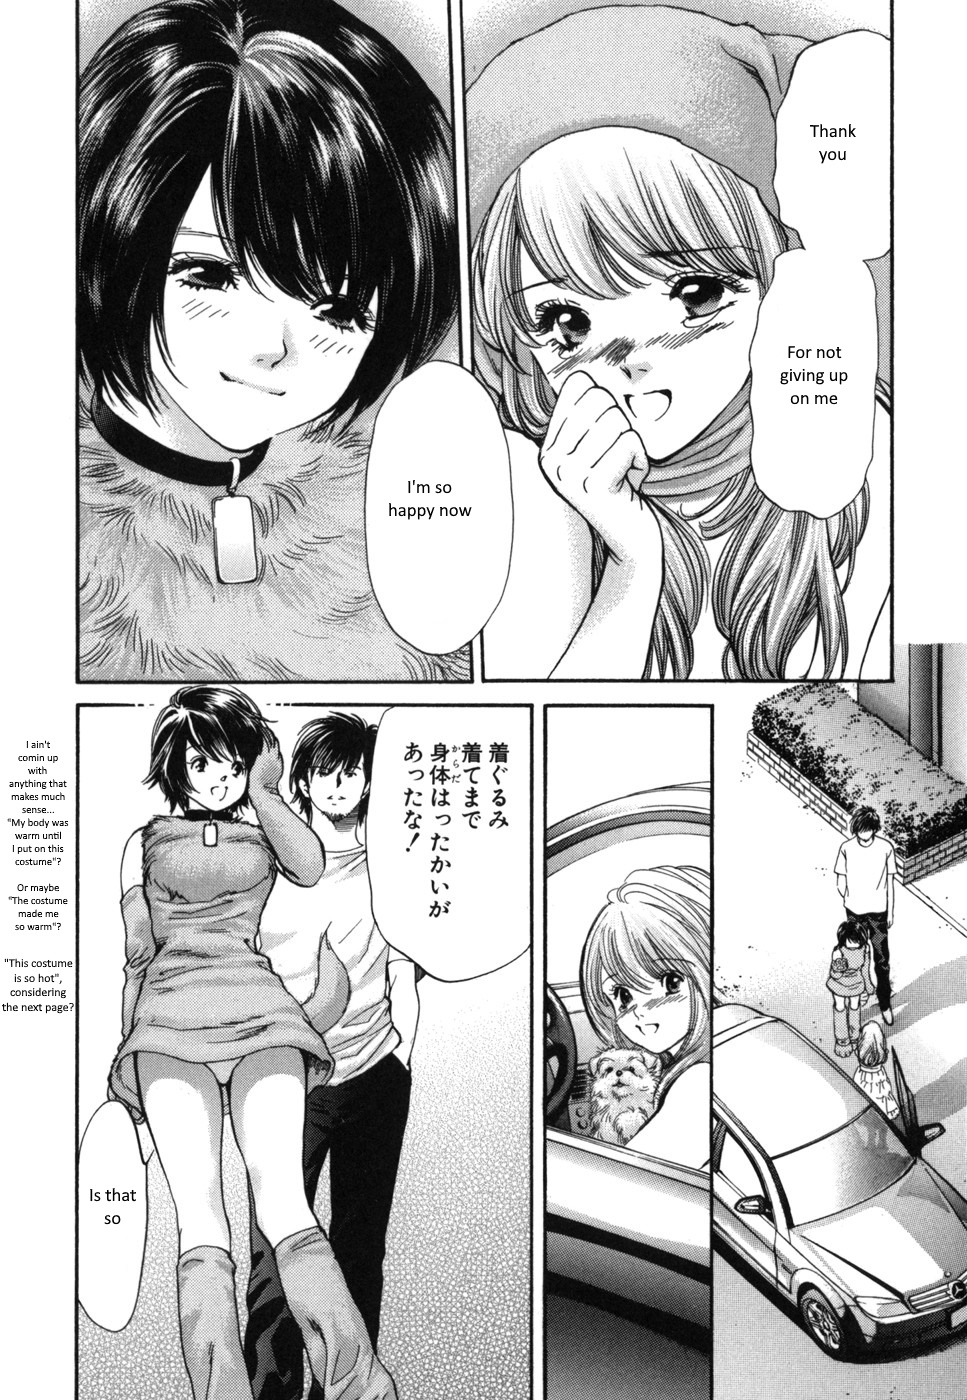 Inubaka Vol. 17 Ch. 177 Going Home with Serina